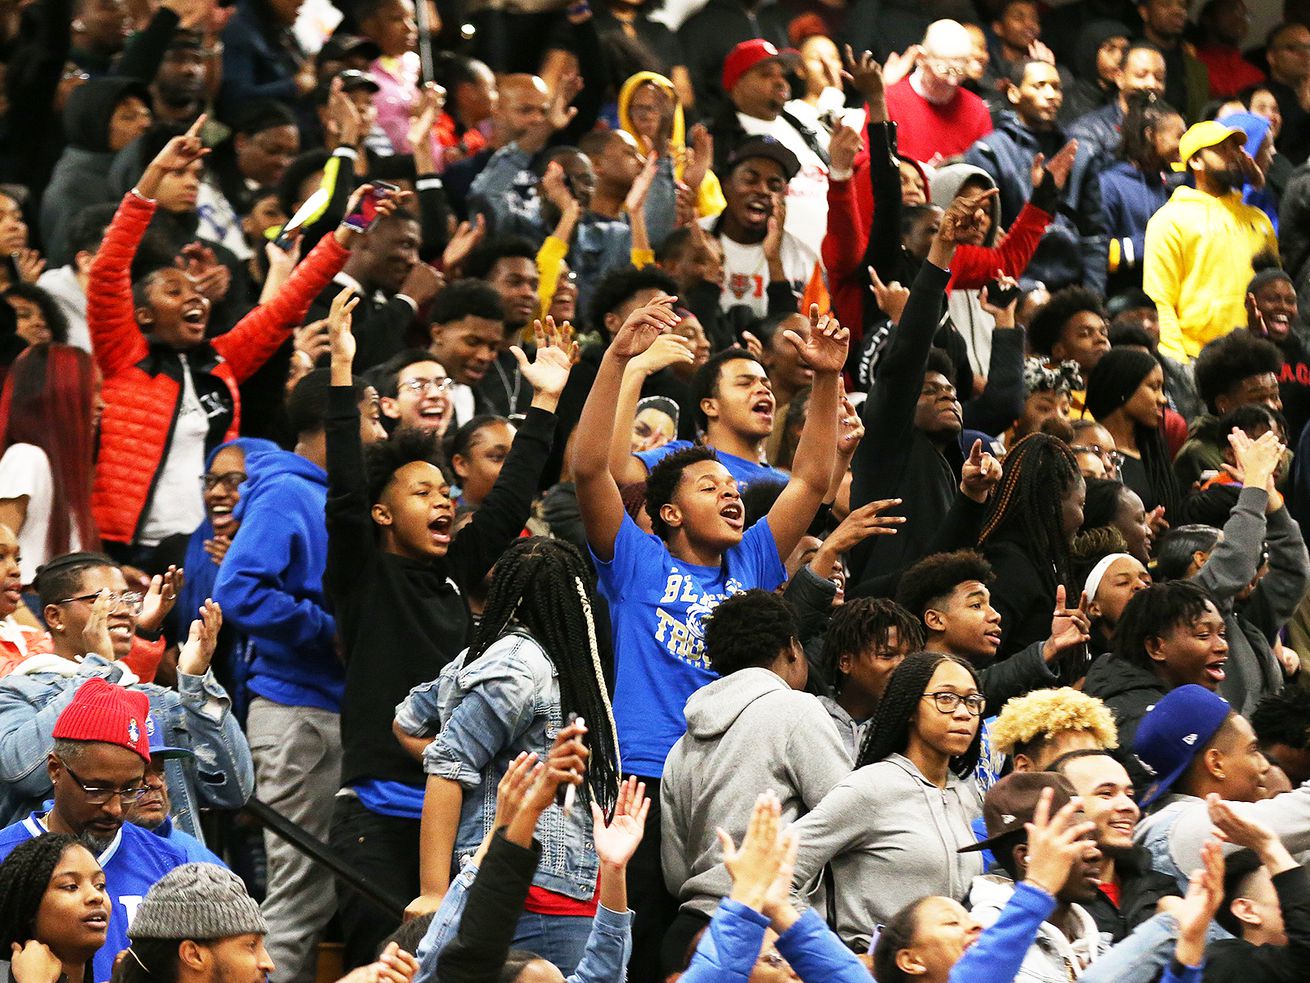 Bloom’s fans enjoy the game as the Blazing Trojans defeat Thornton 74-57, Chicago Heights, Illinois, January 29, 2020.